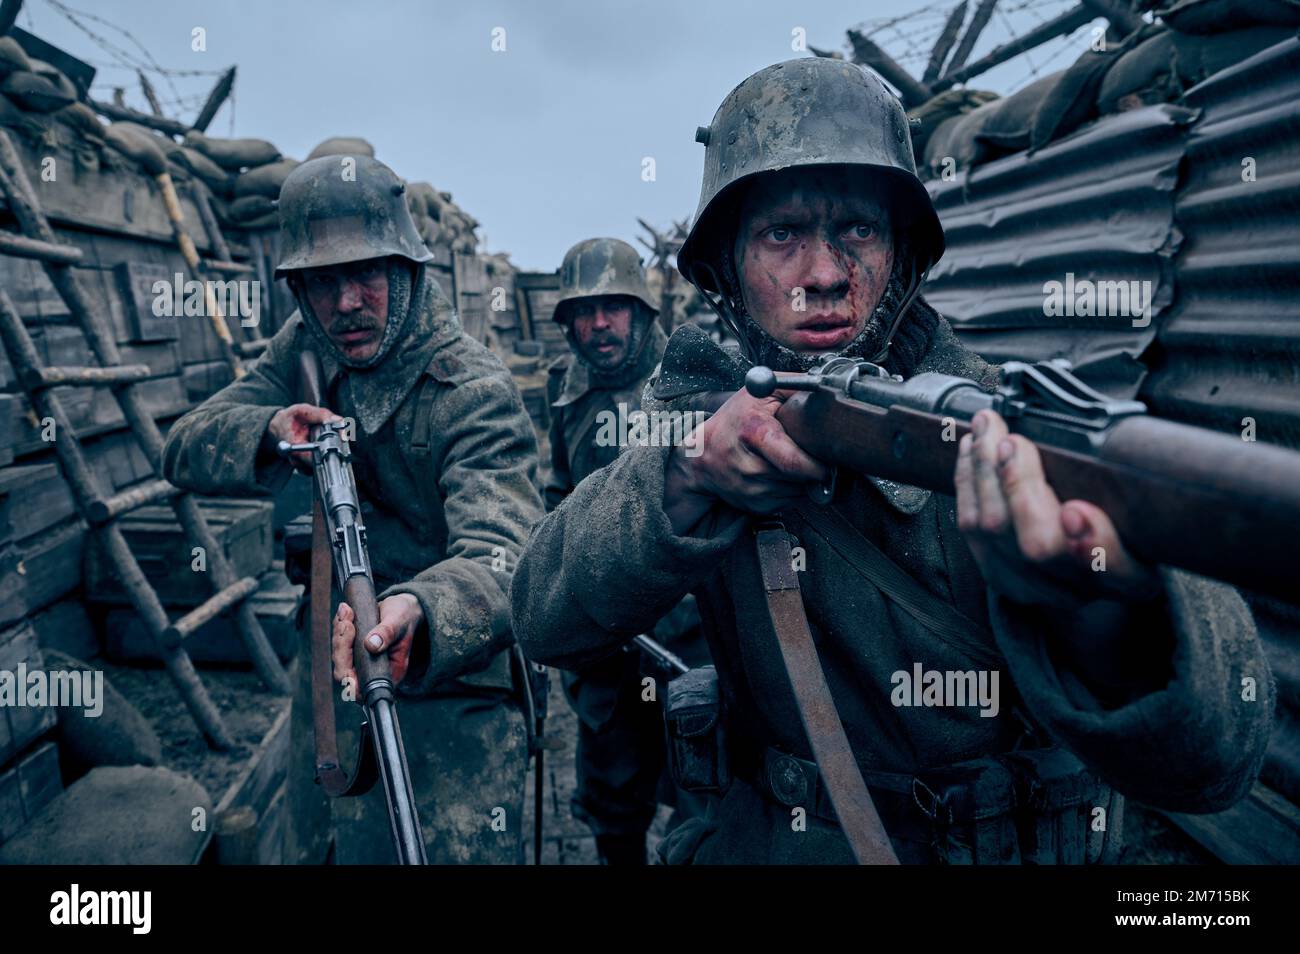 RELEASE DATE: October 28, 2022. TITLE: All Quiet On The Wester Front. STUDIO: Netflix. DIRECTOR: Edward Berger. PLOT: A young German soldier's terrifying experiences and distress on the western front during World War I. STARRING: FELIX KAMMERER as Paul Baumer, ALBRECHT SCHUCH, EDIN HASANOVIC. (Credit Image: © Netflix/Entertainment Pictures) Stock Photo